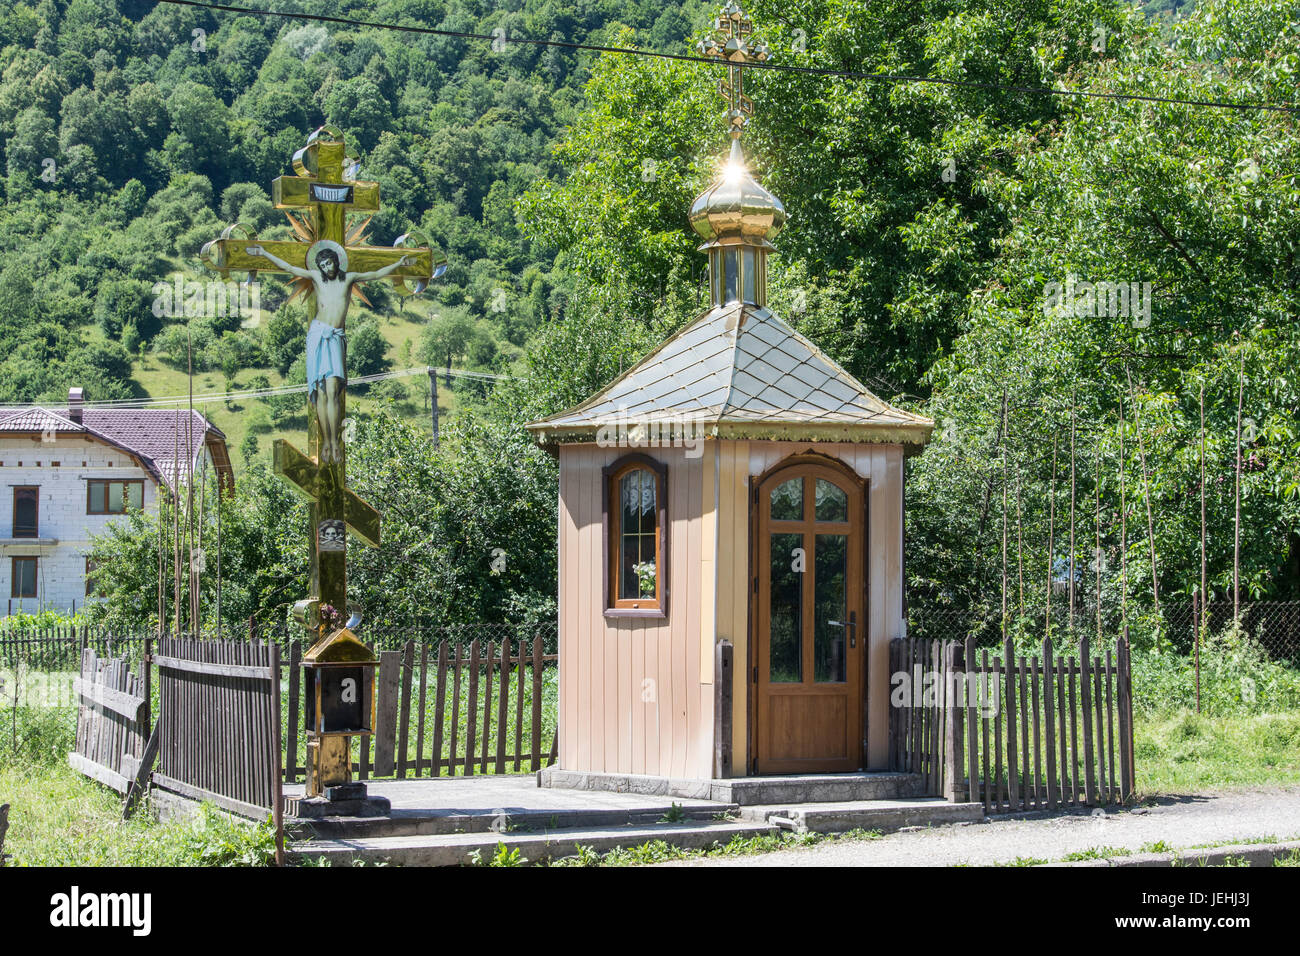 Small orthodox religious monument on the edge of a street in Ukraine Stock Photo